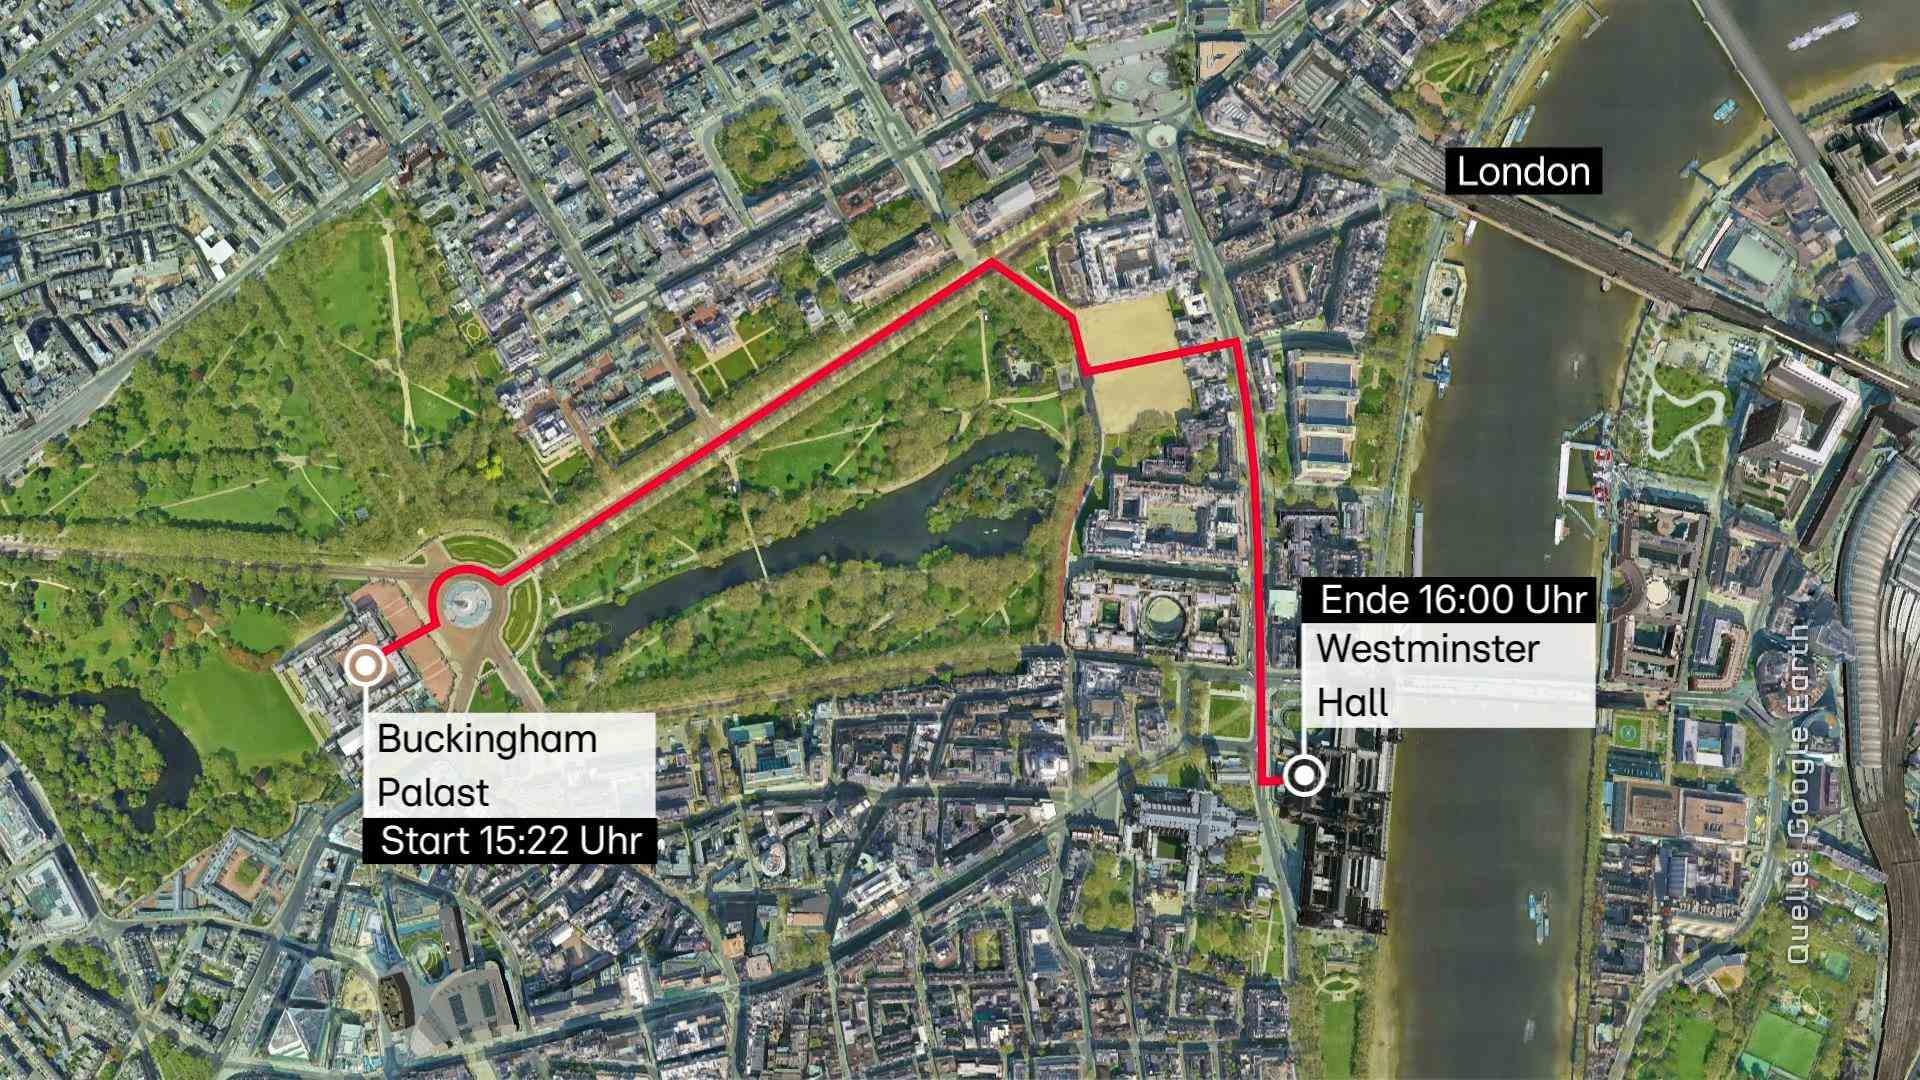 This is the route of the funeral procession starting at Buckingham Palace